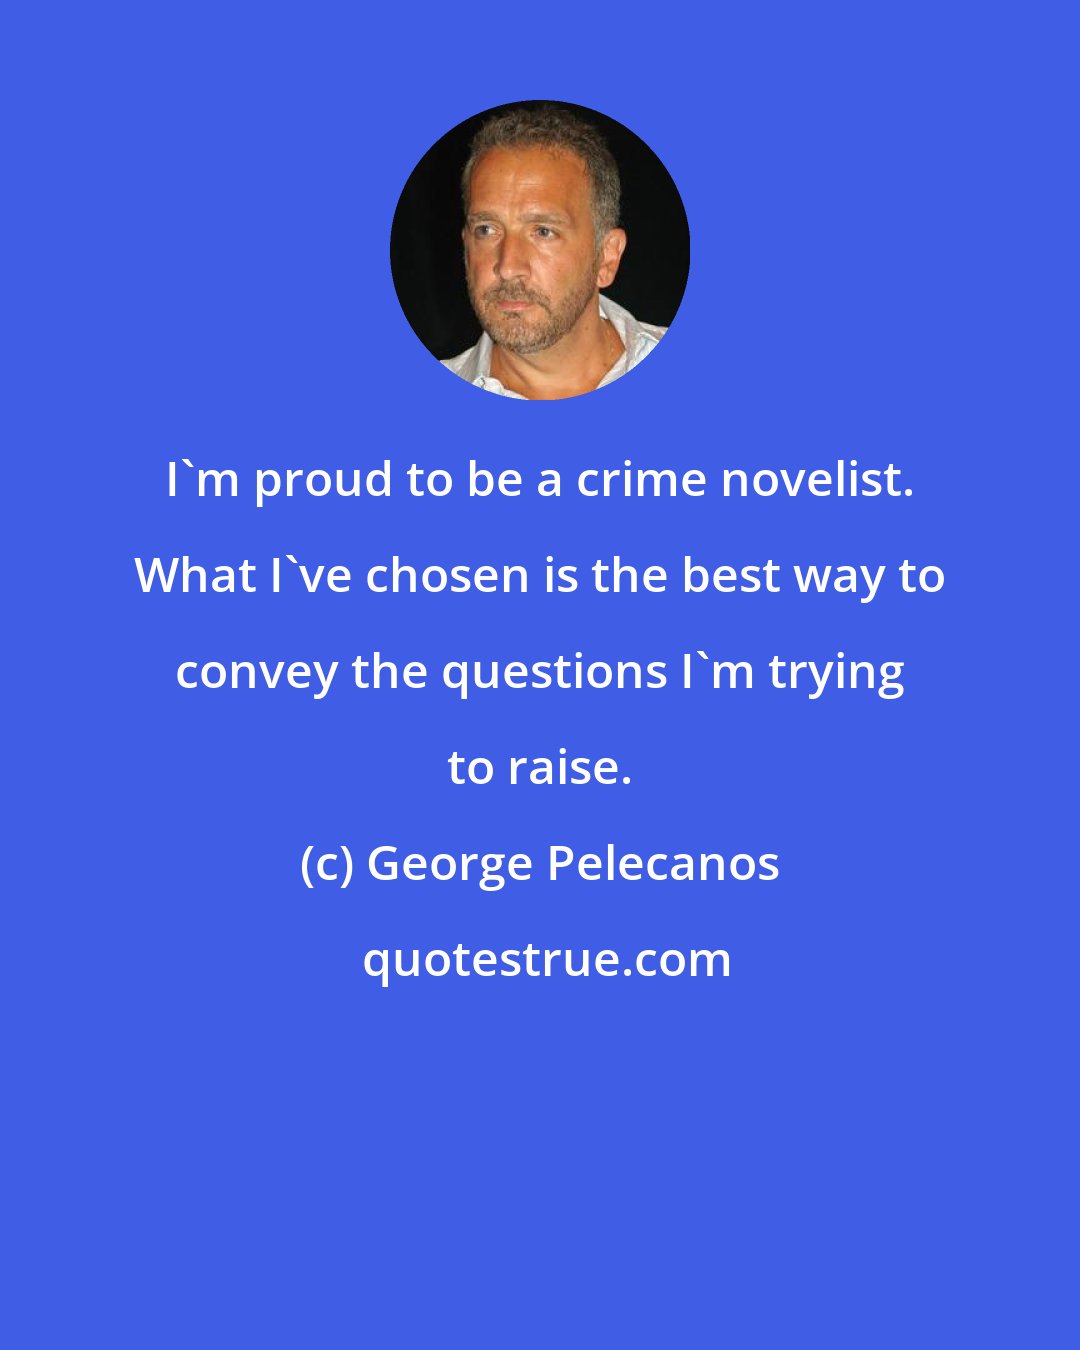 George Pelecanos: I'm proud to be a crime novelist. What I've chosen is the best way to convey the questions I'm trying to raise.